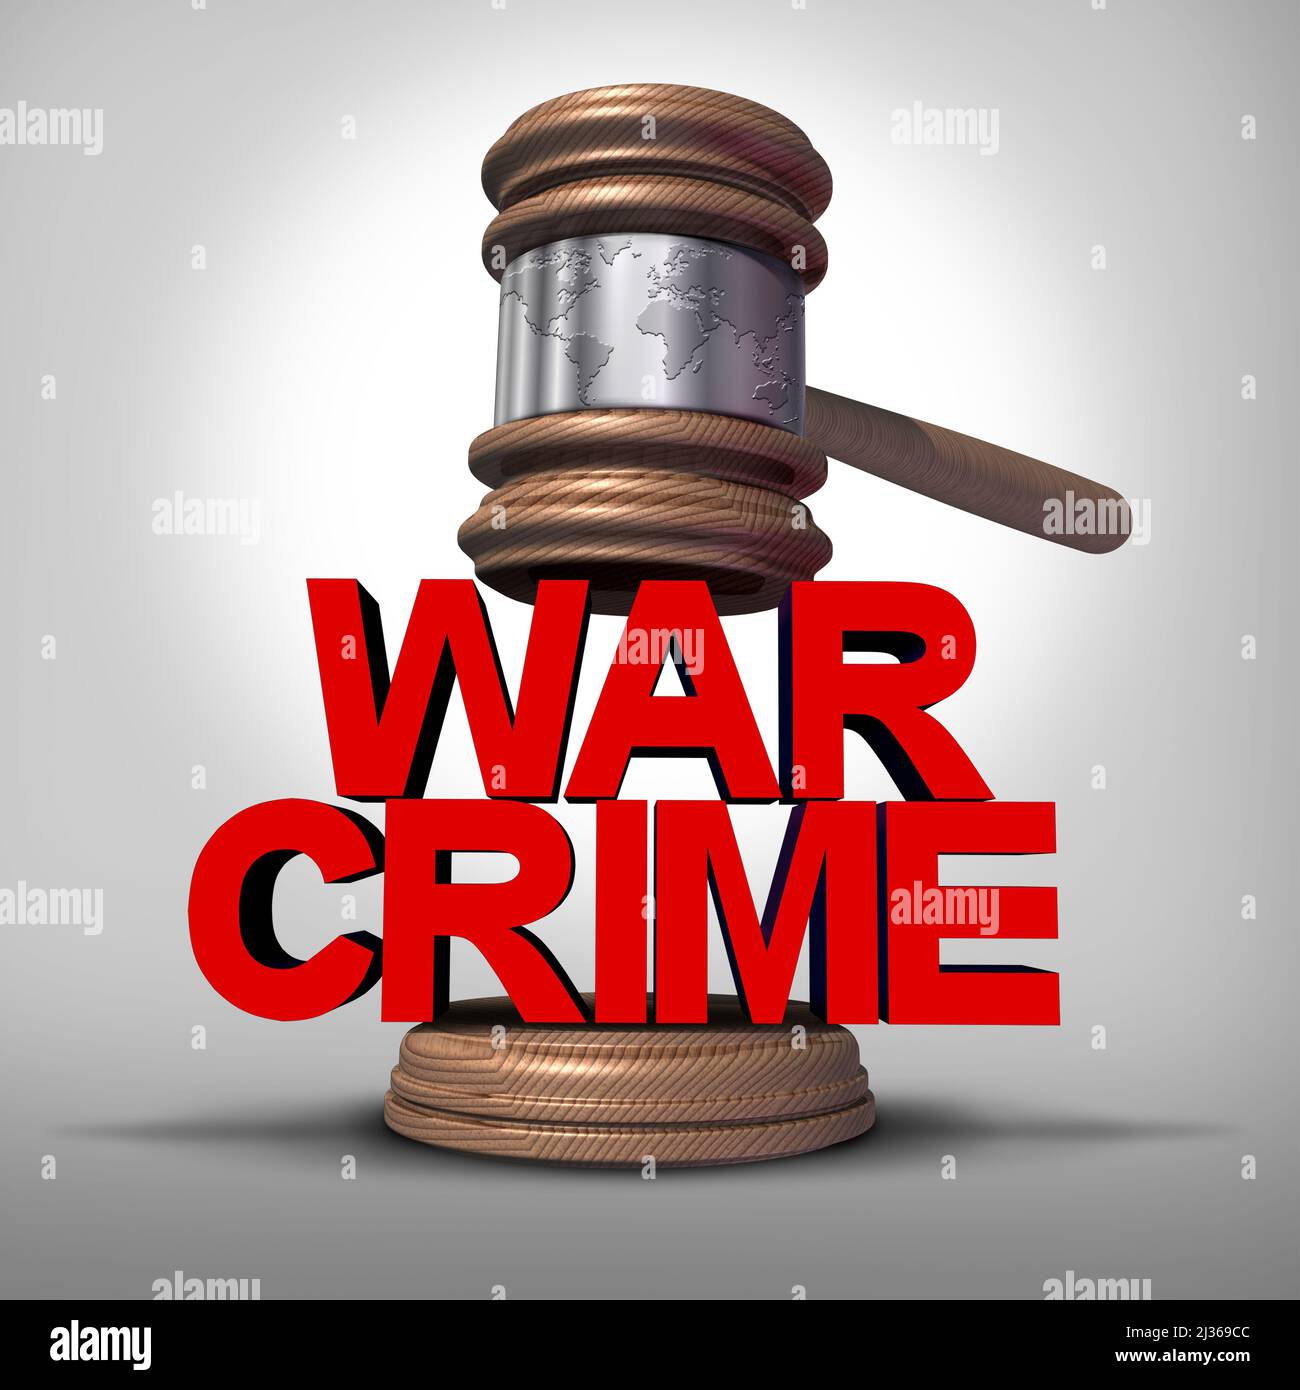 War crime and military criminal justice as a symbol for crimes against humanity as a 3D illustration. Stock Photo